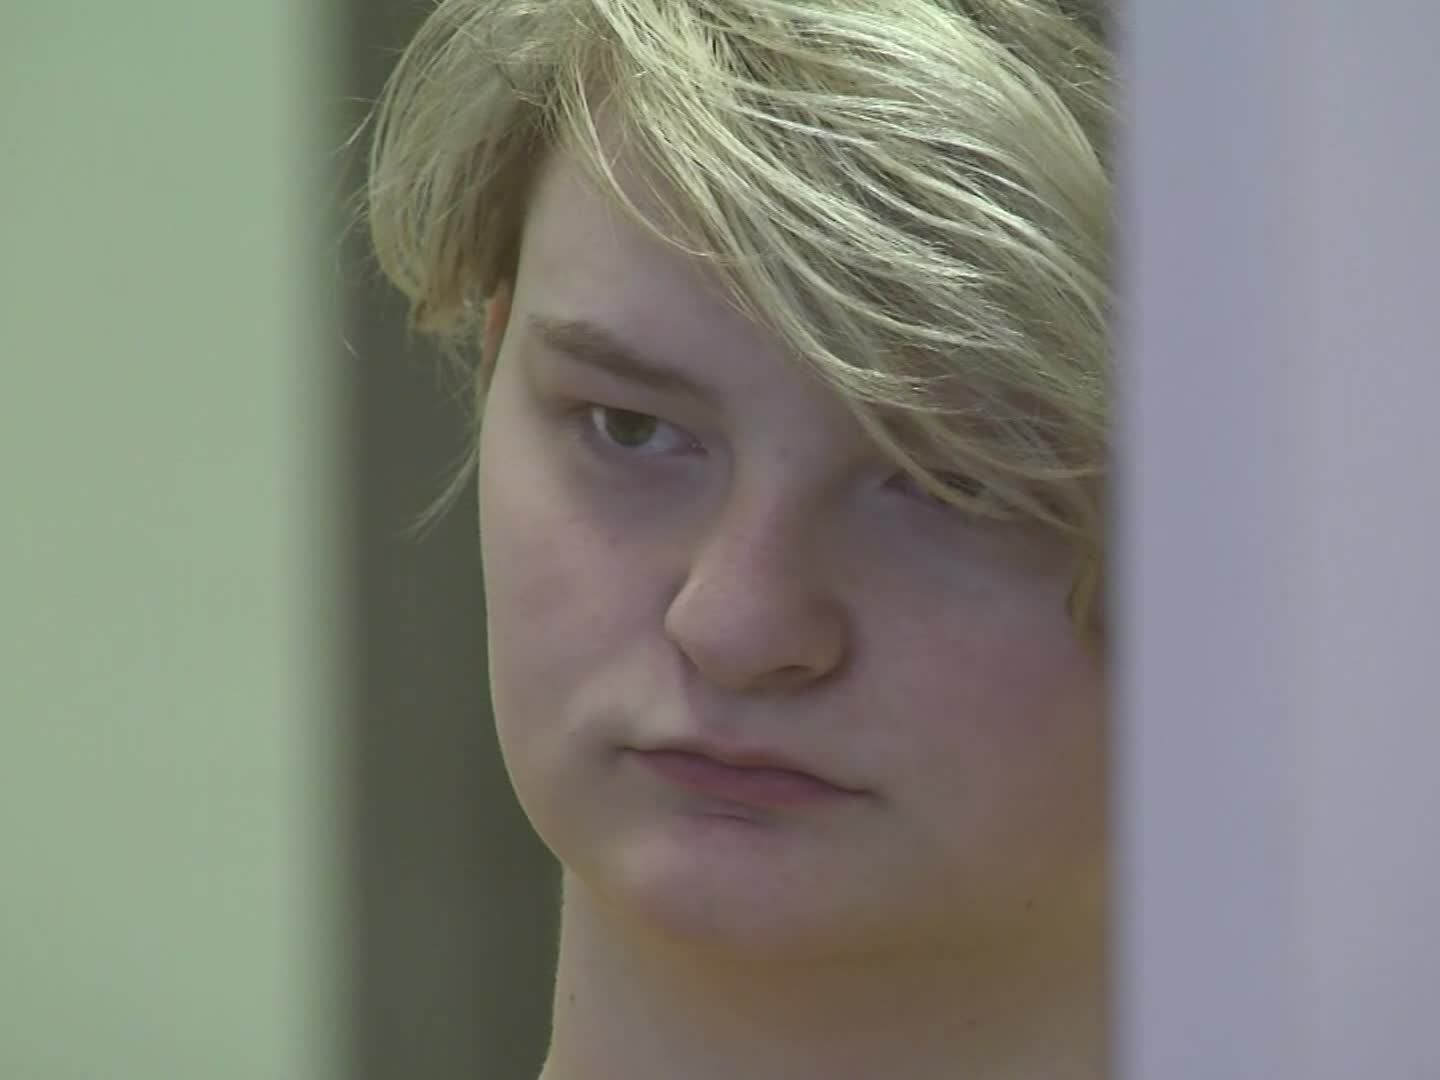 Bound Teen - Alaska teen accused of killing friend for $9 million also faces federal  child porn charges